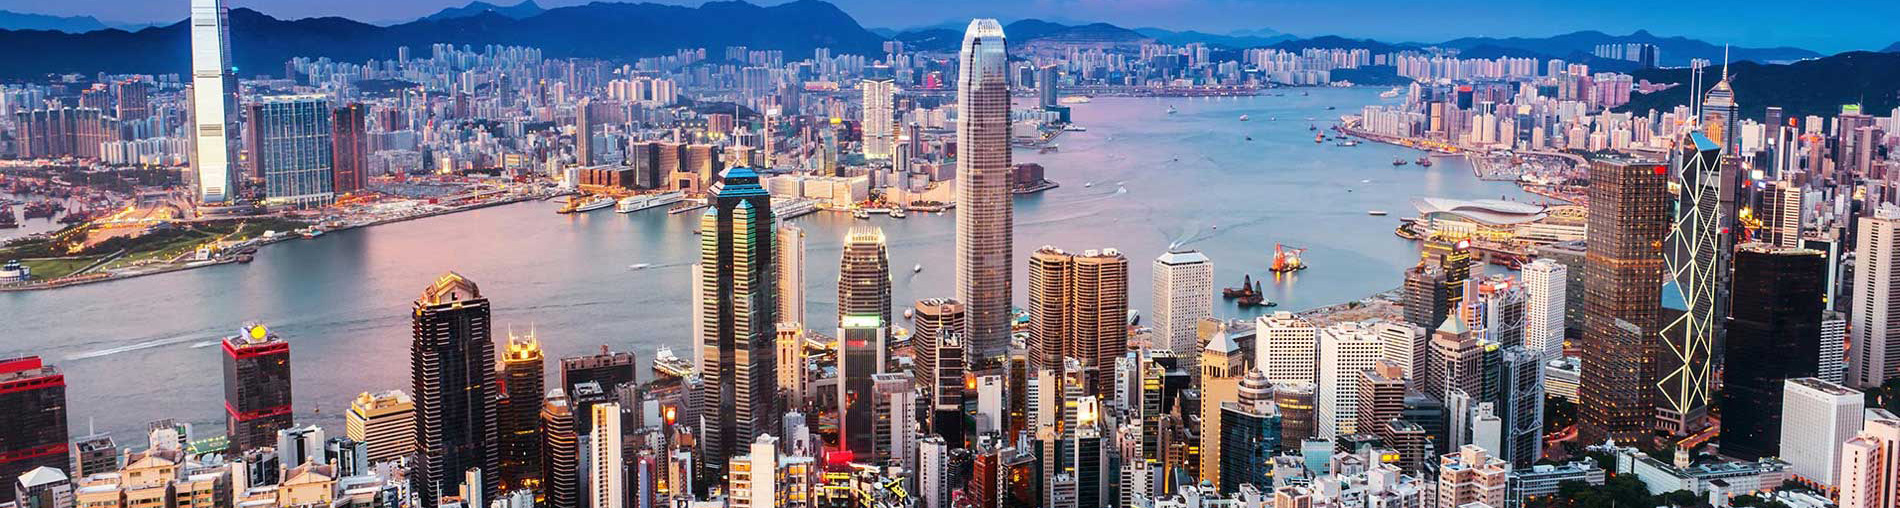 Most Popular Hong Kong Tour Packages